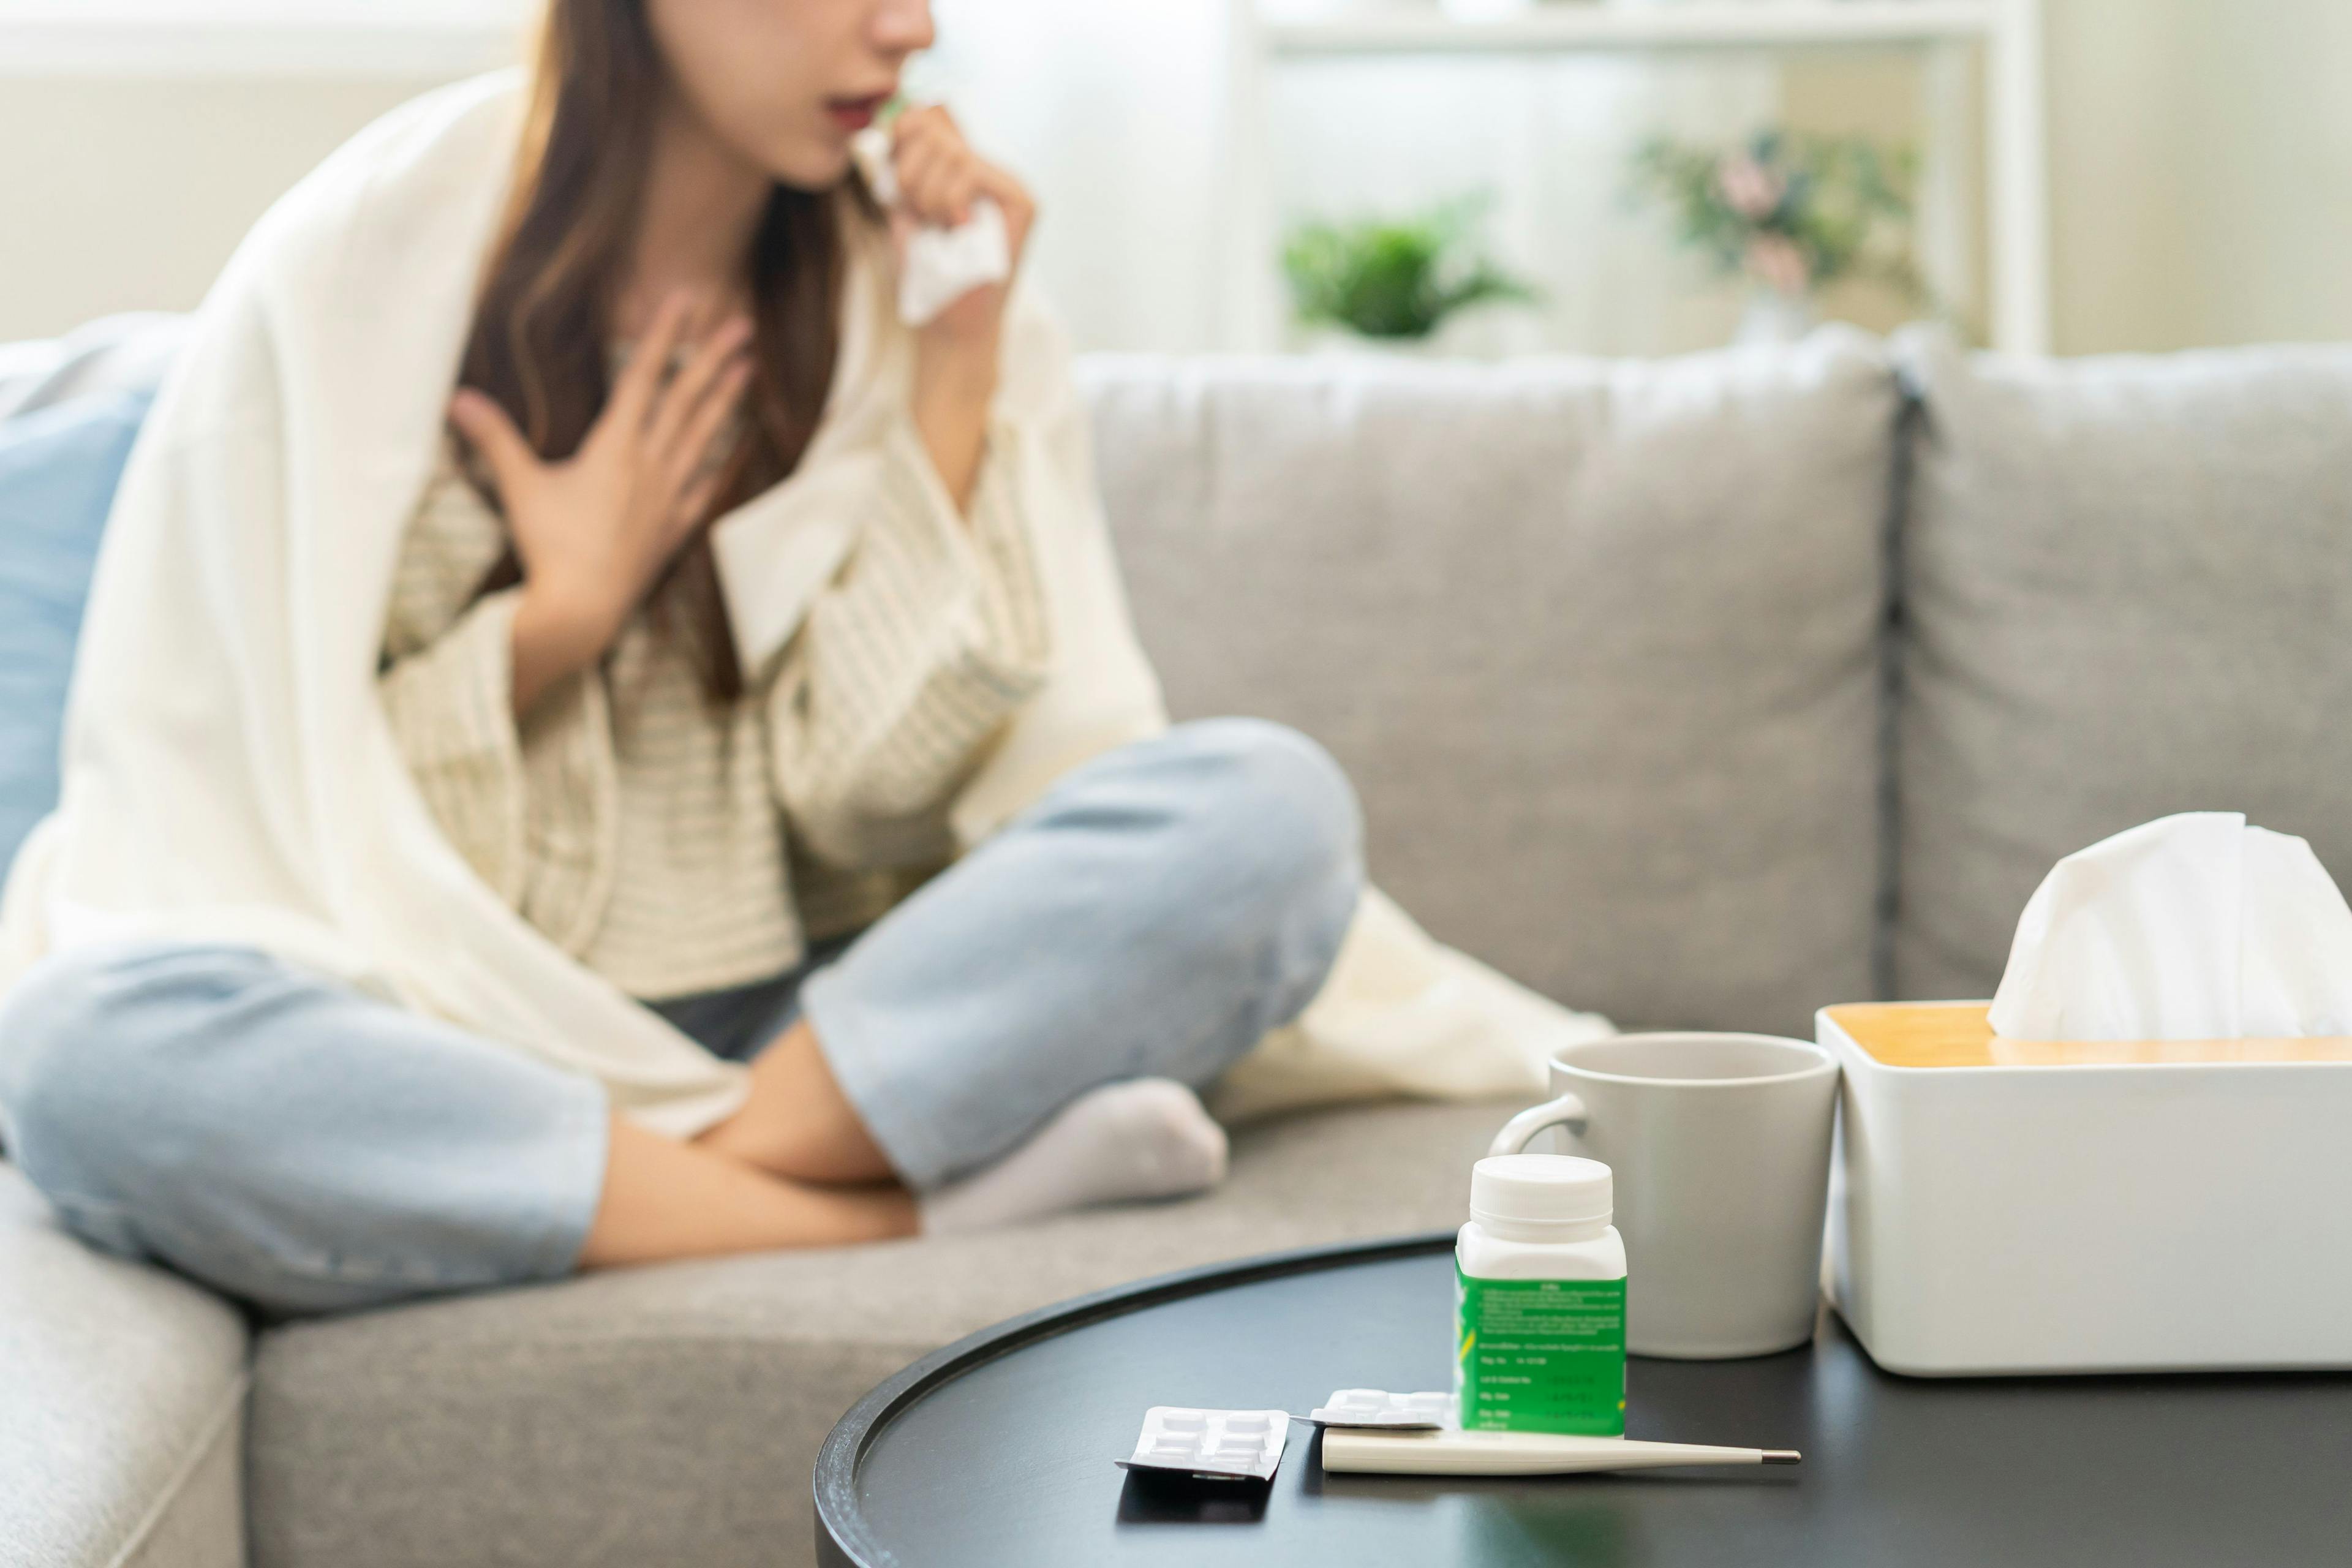 Develop Strategies for Managing Medications During Sick Days